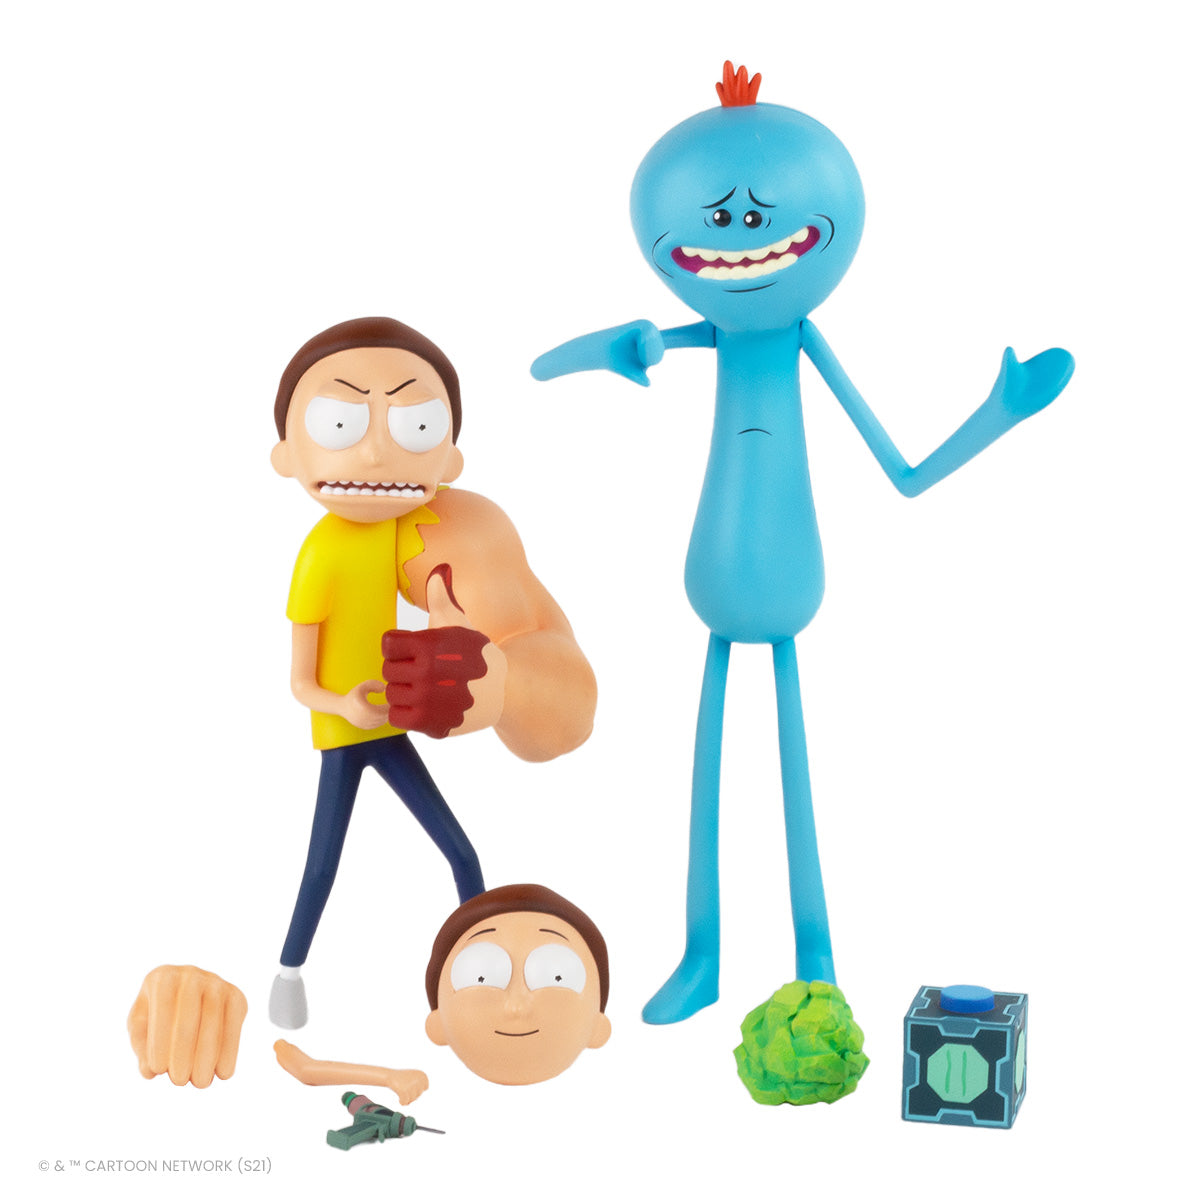 Rick and Morty Collectible Figure Set of 2